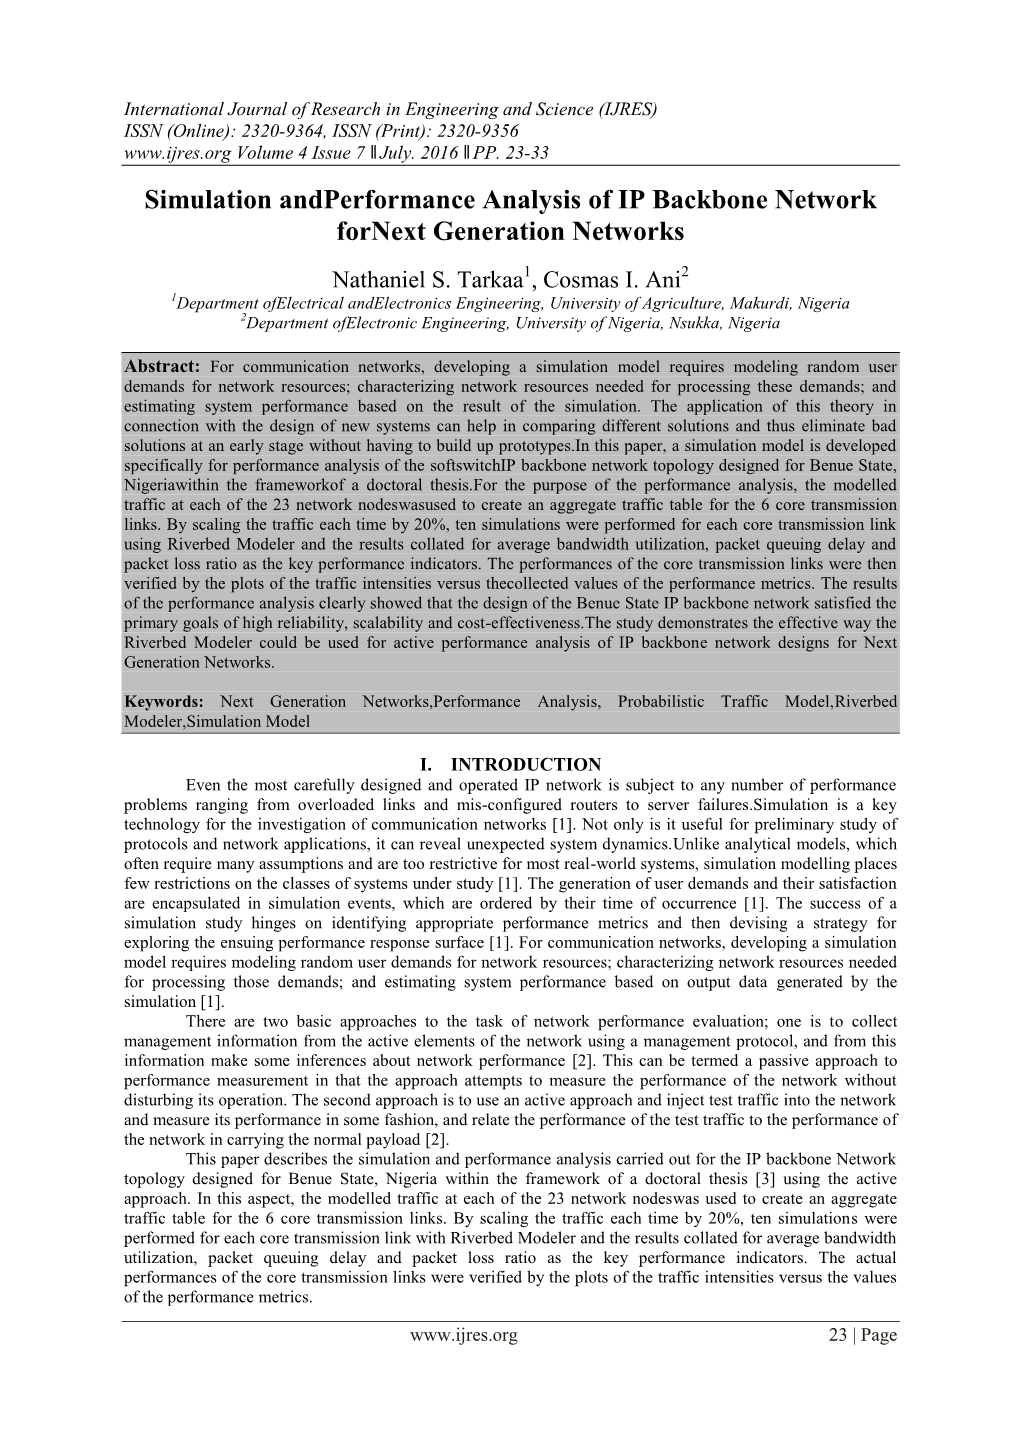 Simulation Andperformance Analysis of IP Backbone Network Fornext Generation Networks